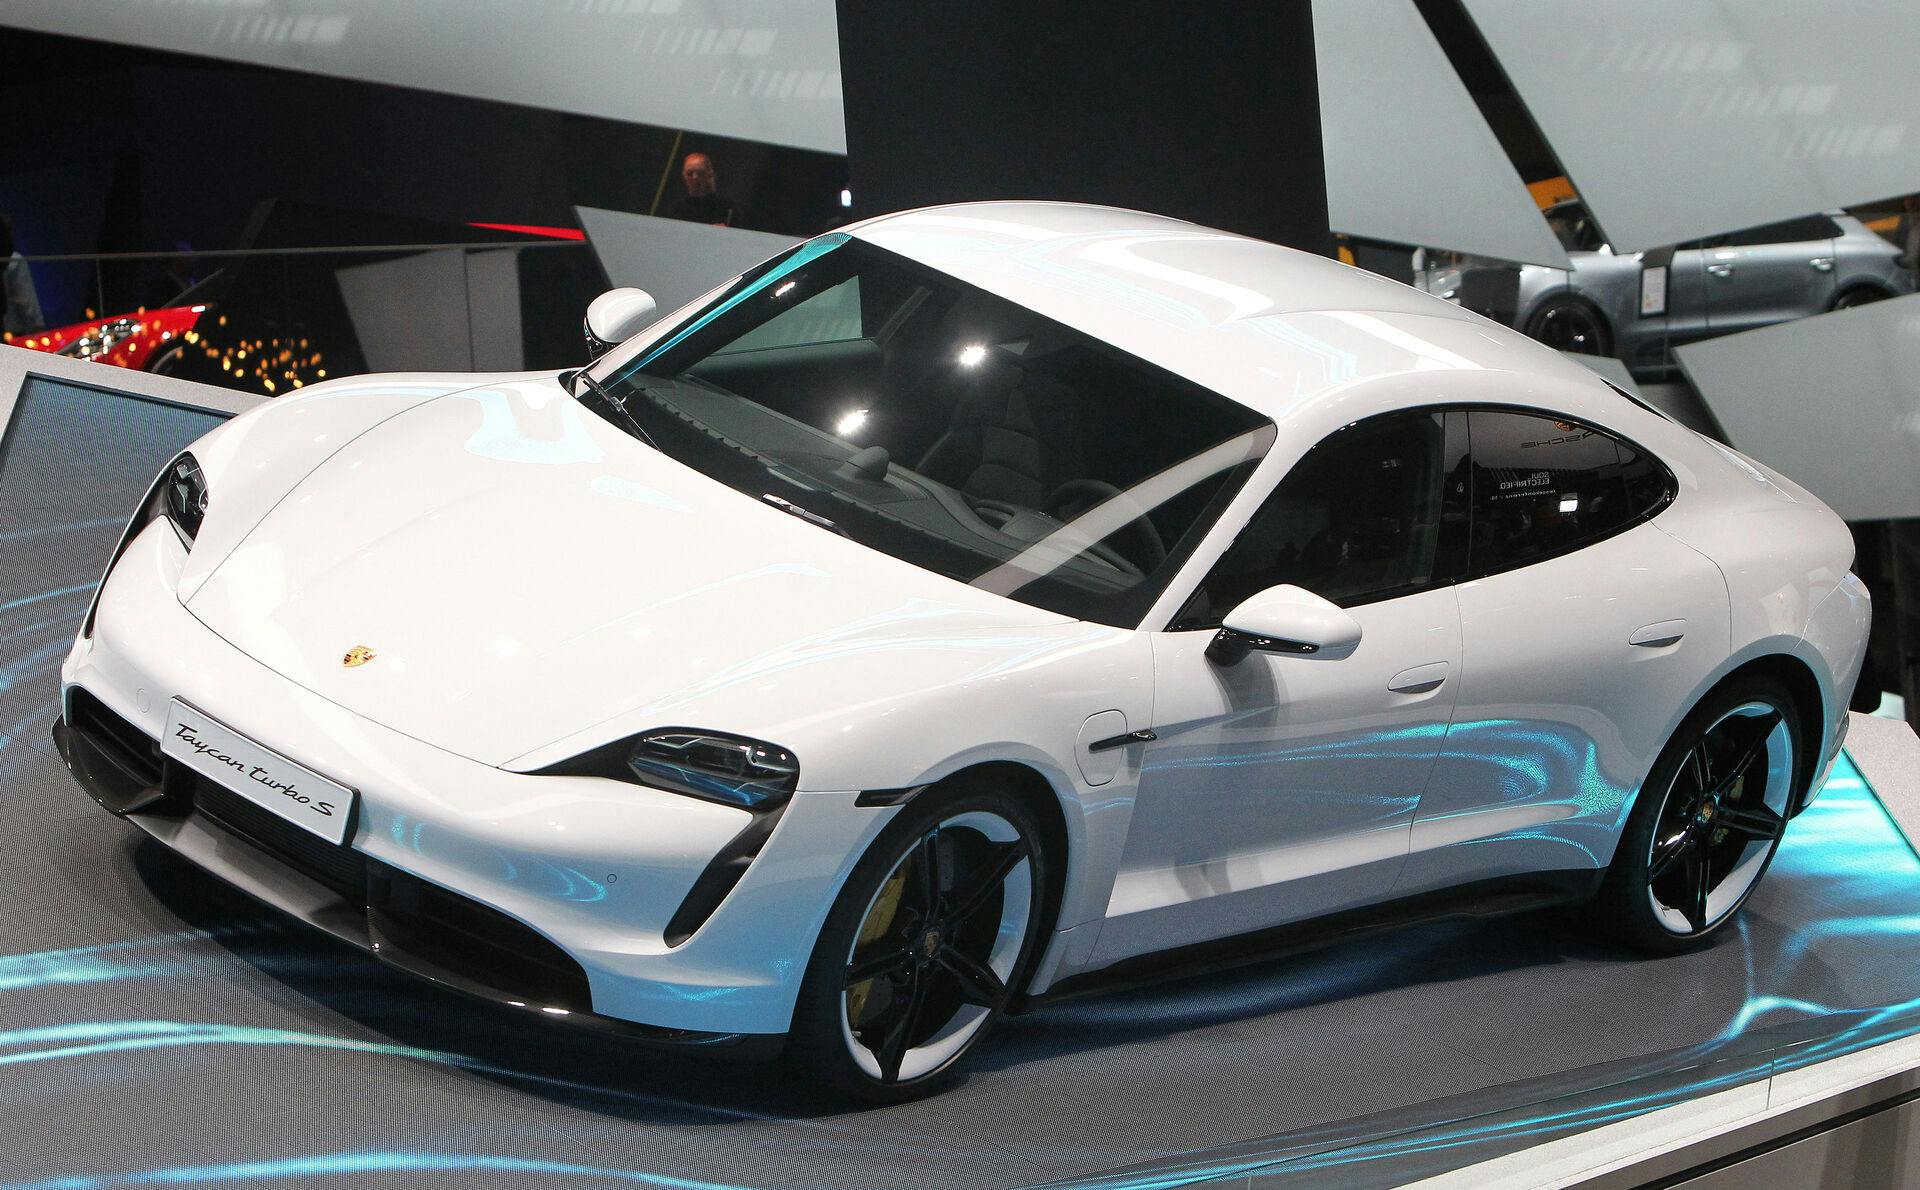 A Porsche Taycan Turbo S car is pictured at the company's booth at the International Auto Show (IAA), in Frankfurt am Main, on September 11, 2019. Frankfurt's biennial International Auto Show (IAA) opens its doors to the public on September 12, 2019, but major foreign carmakers are staying away while climate demonstrators march outside - - forming a microcosm of the under-pressure industry's woes. Daniel ROLAND / AFP